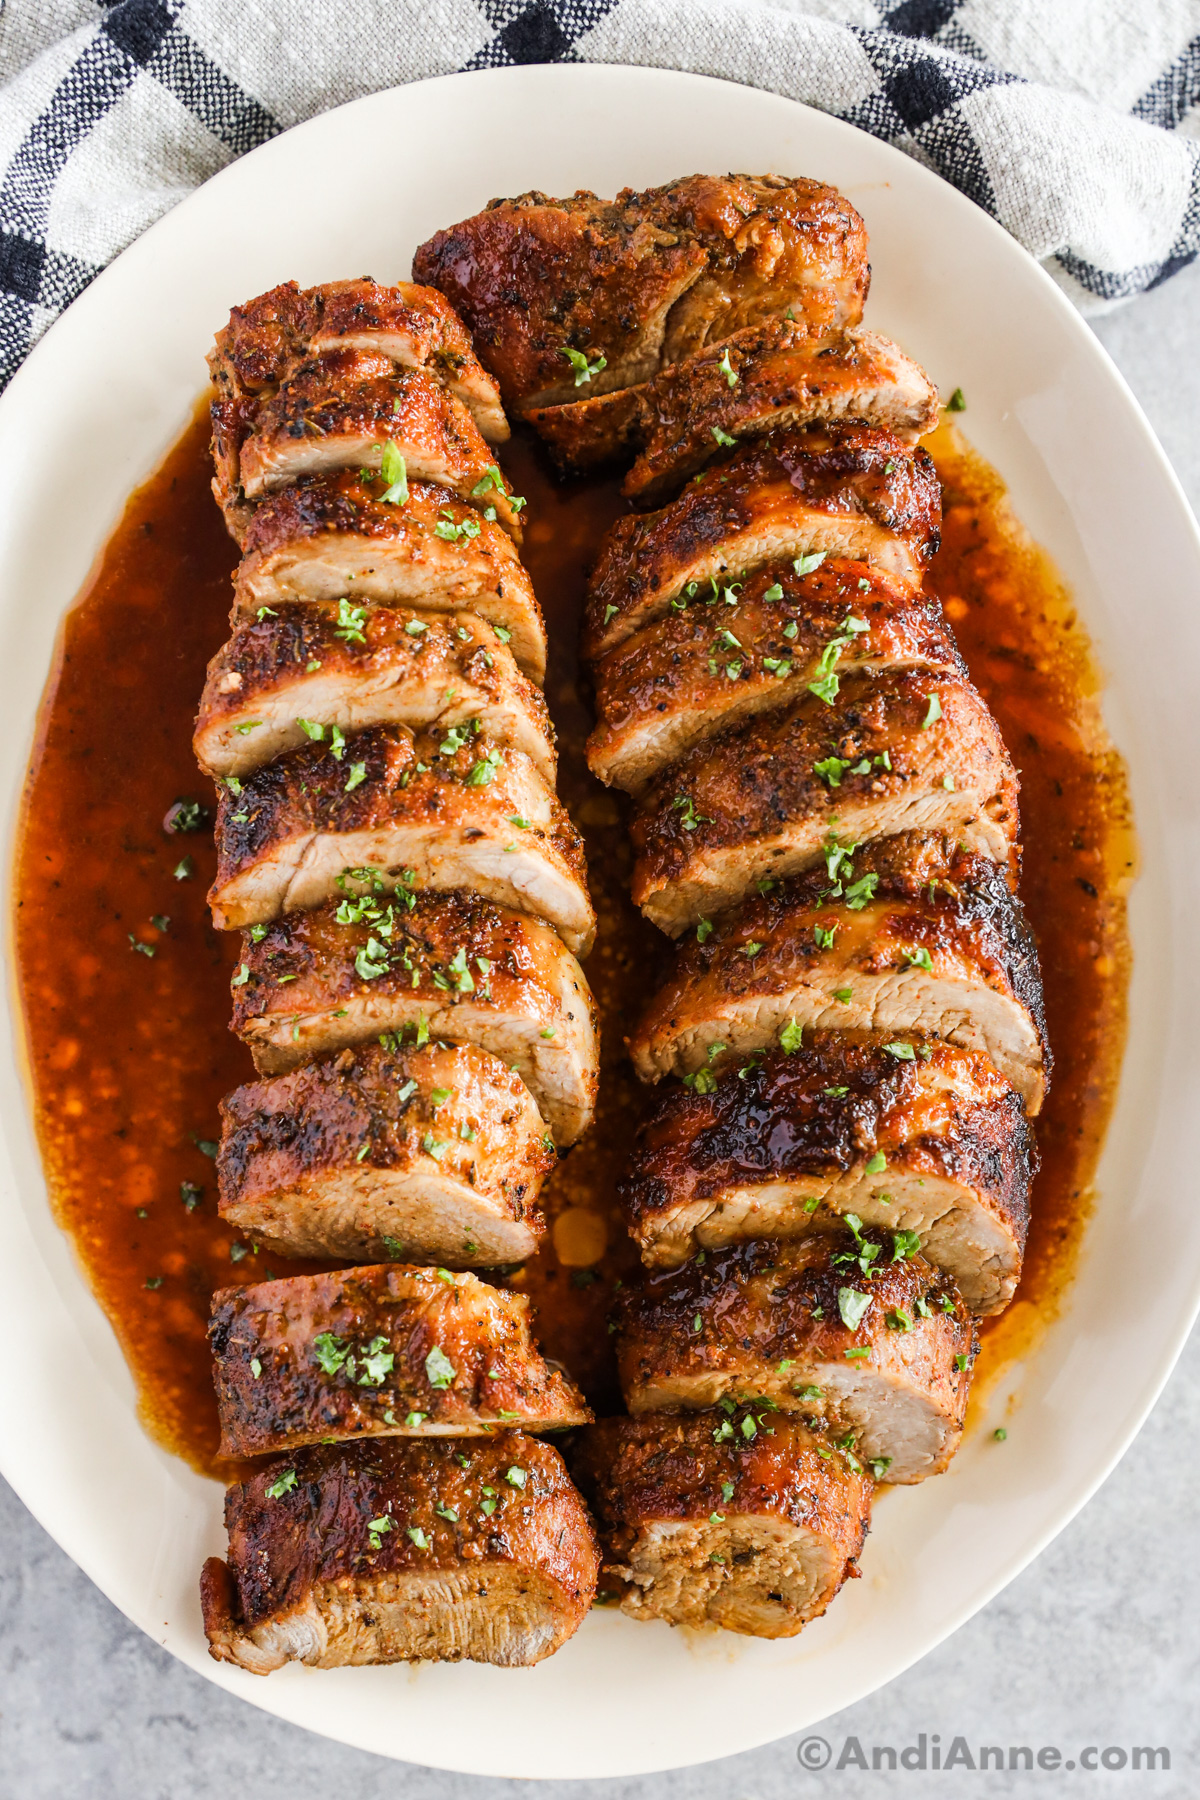 Plate with baked sliced pork tenderloin with juices.